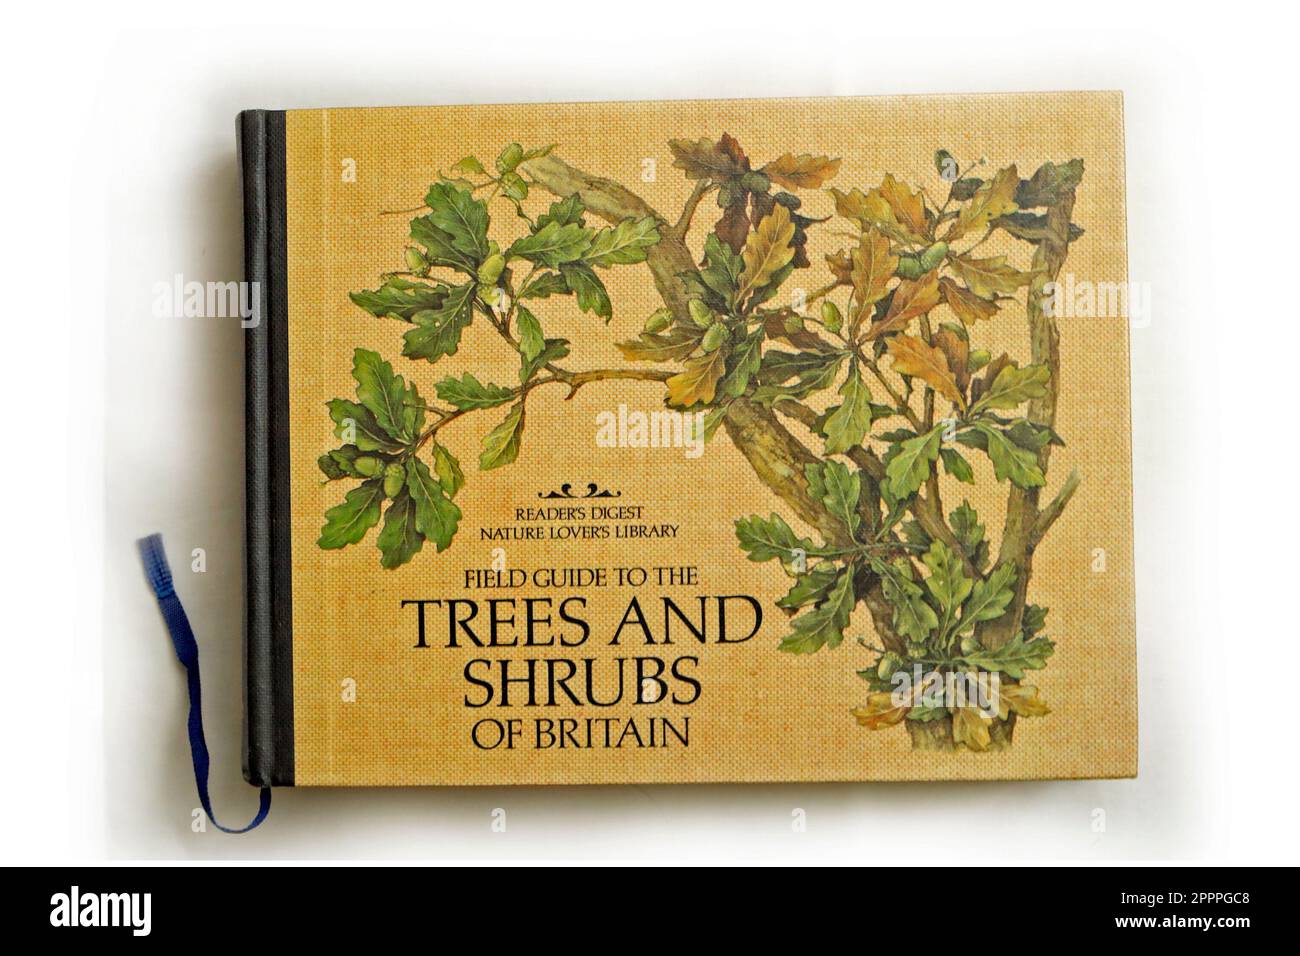 Hardback-Buch auf weißem Hintergrund - Reader's Digest Nature Lovers Library - Field Guide to the Trees and Shrubs of Britain Stockfoto